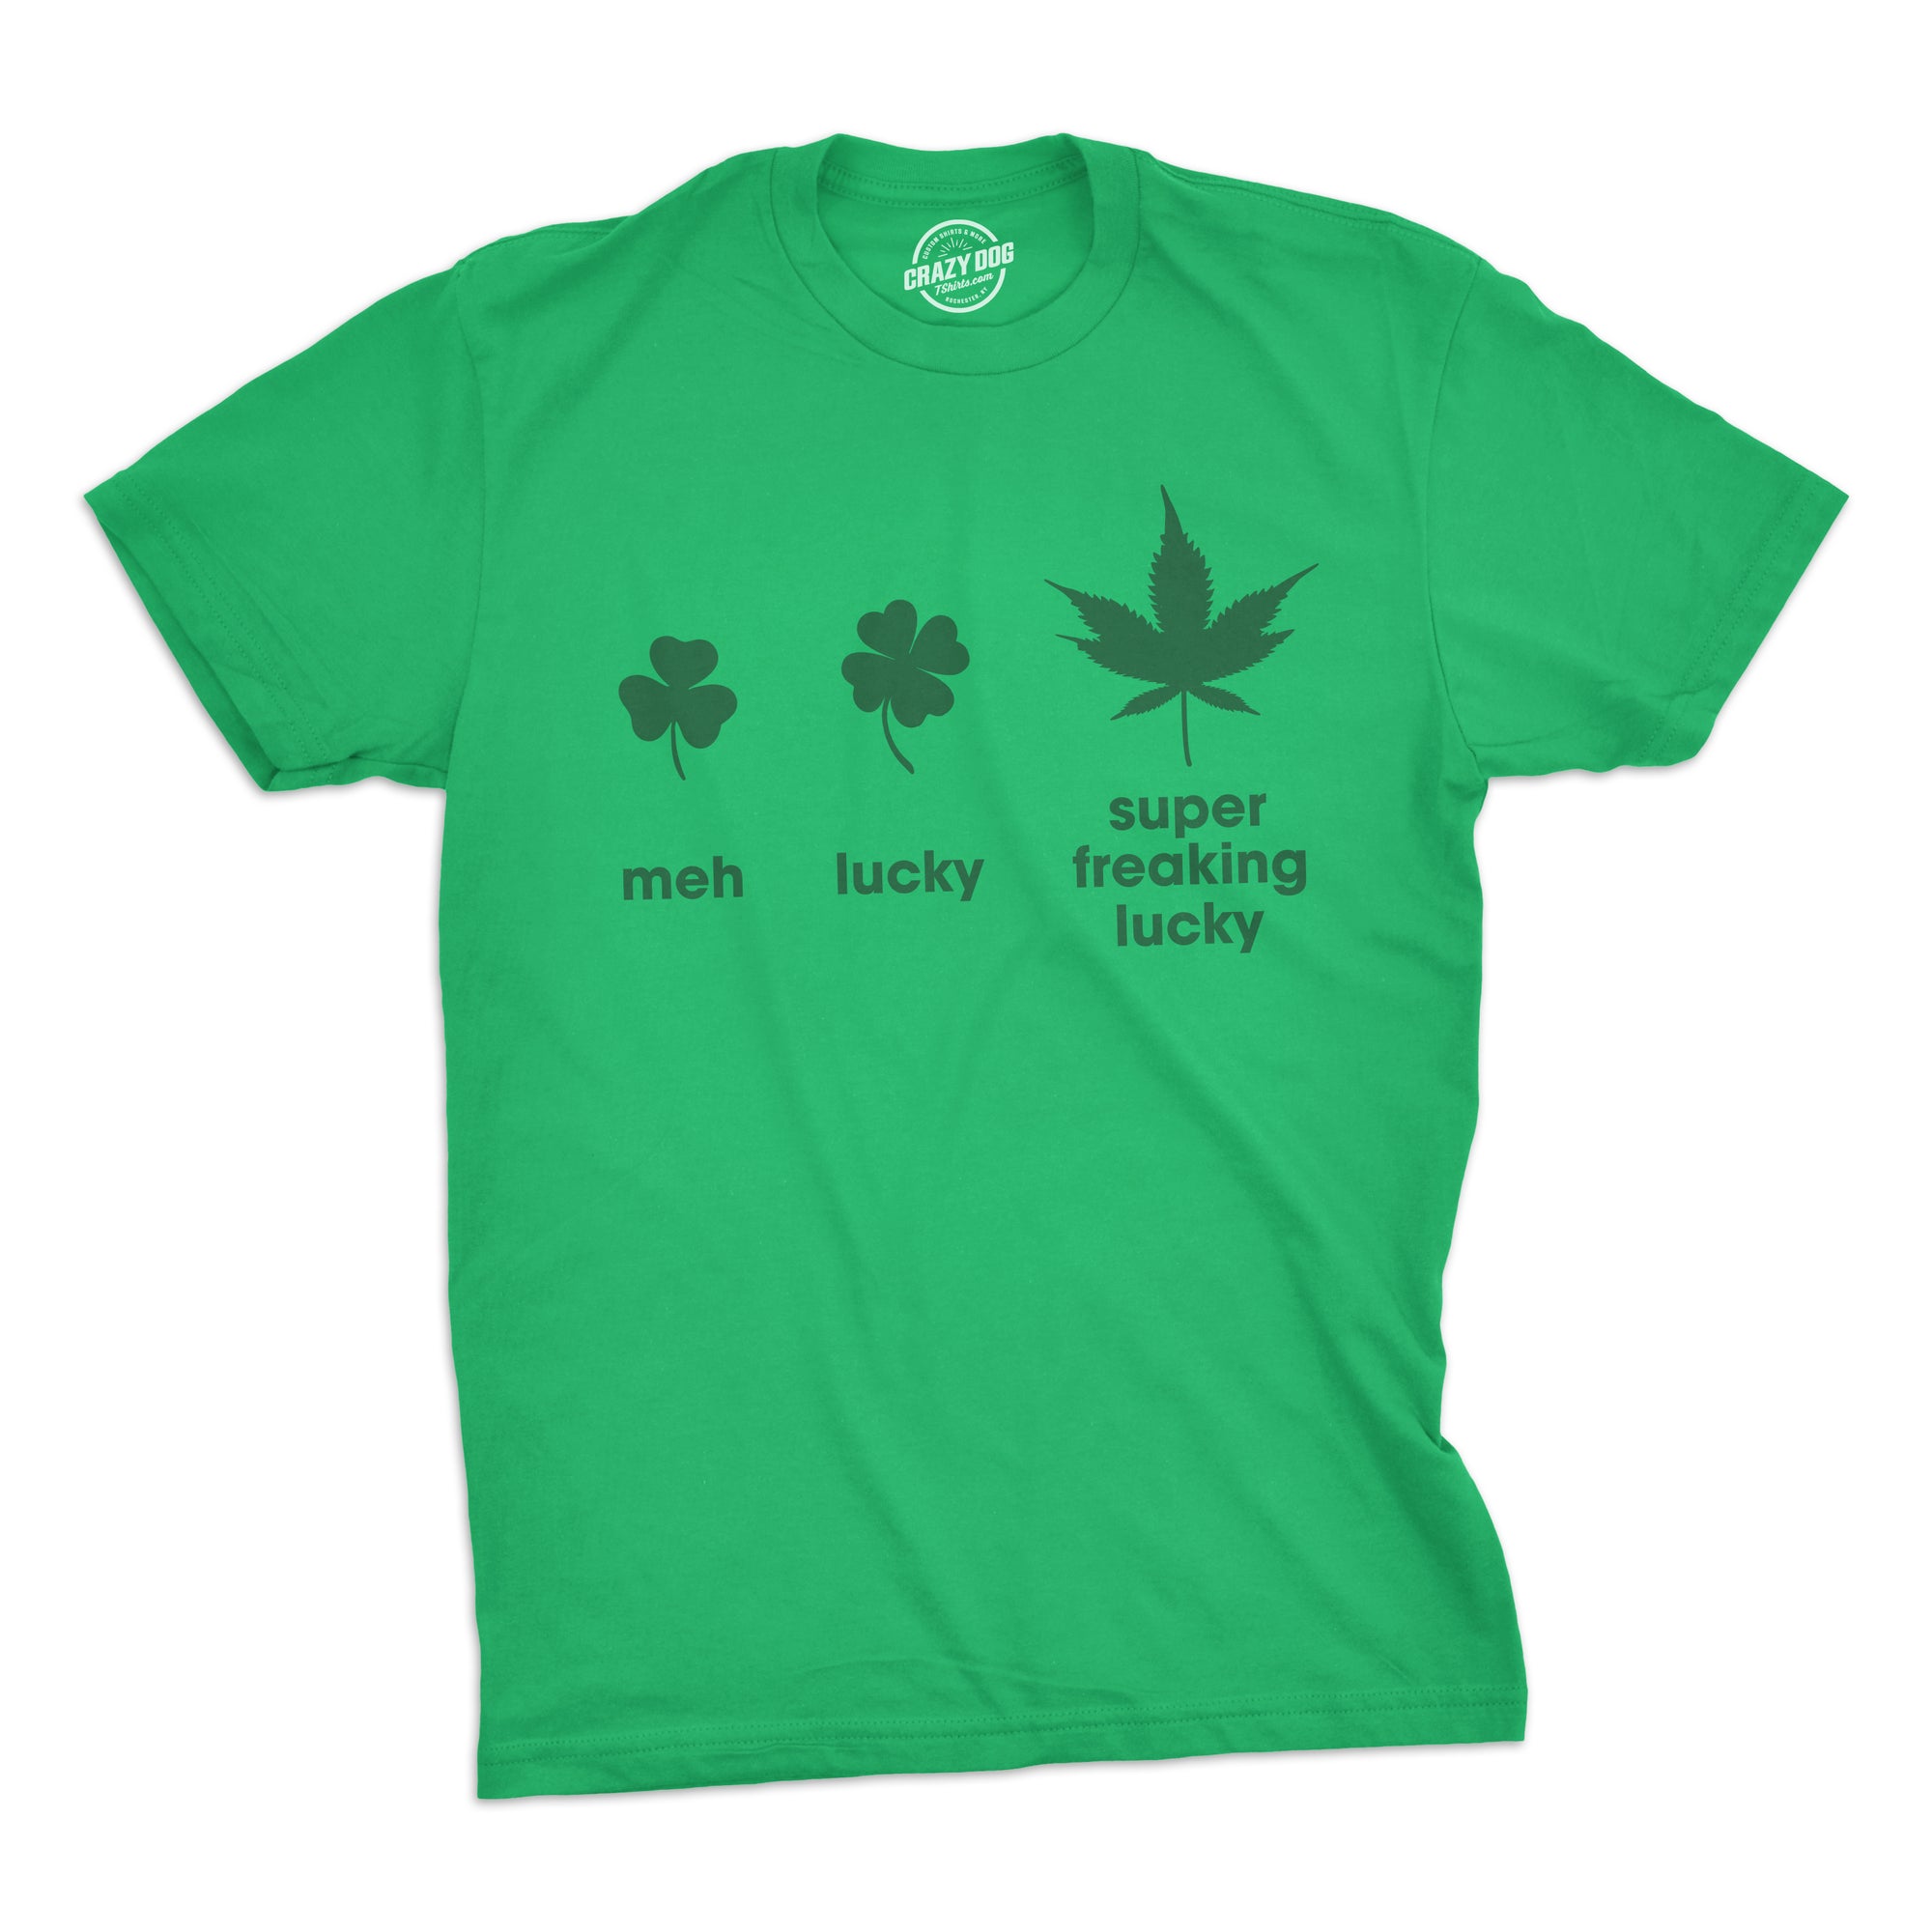 Funny Green Super Freaking Lucky Mens T Shirt Nerdy Saint Patrick's Day 420 Tee